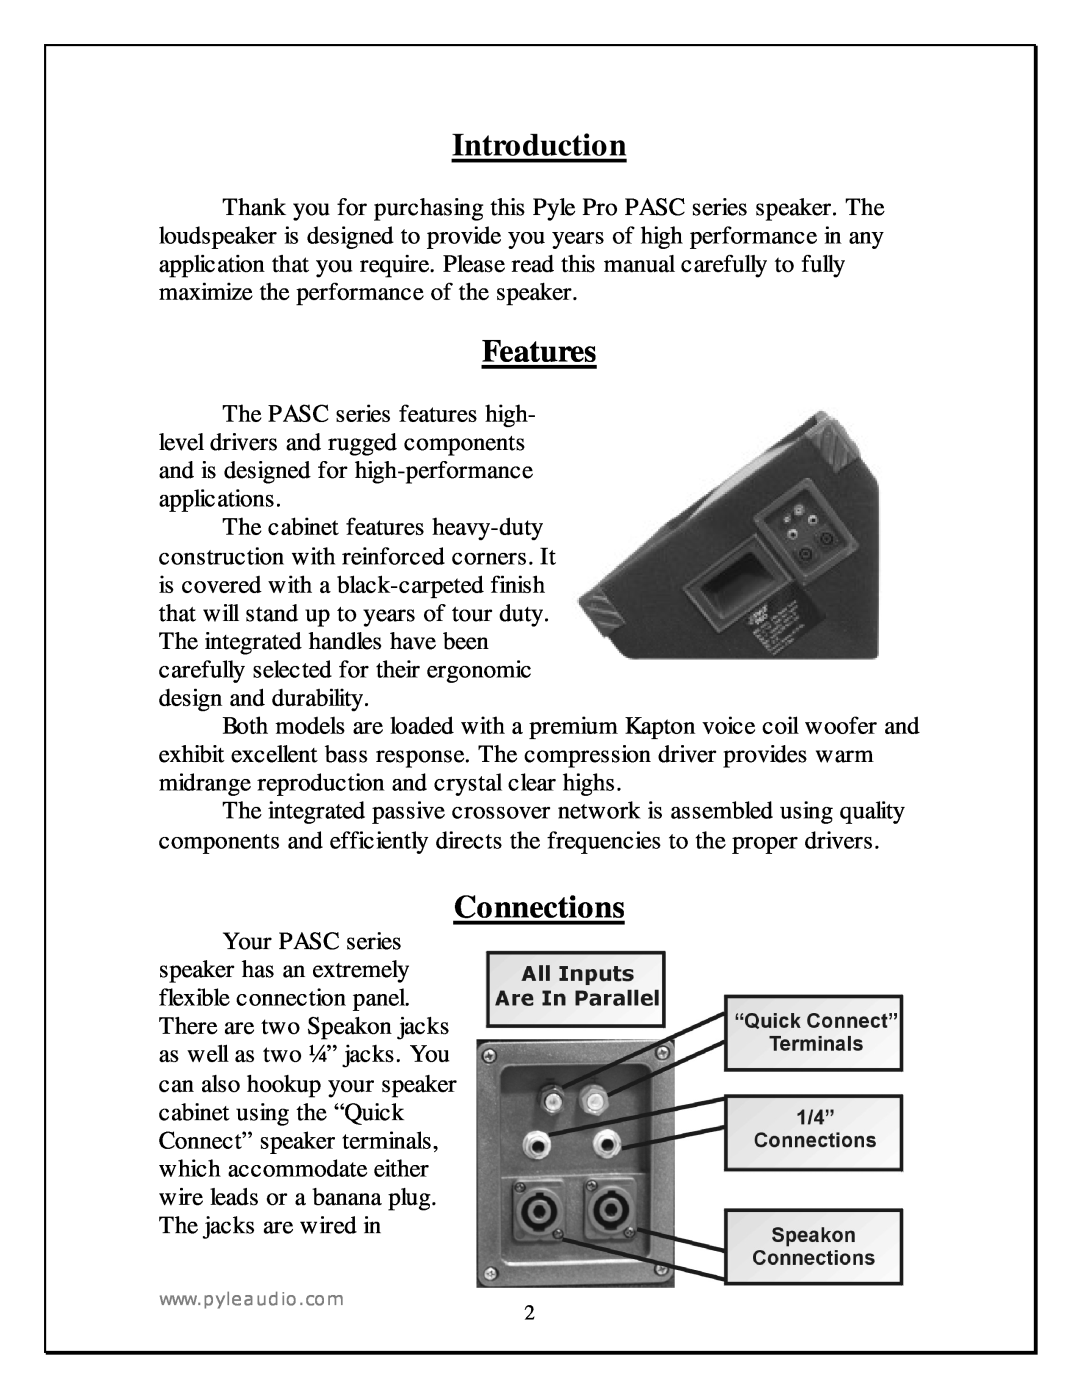 Radio Shack PASC12 manual Introduction, Features, Connections 